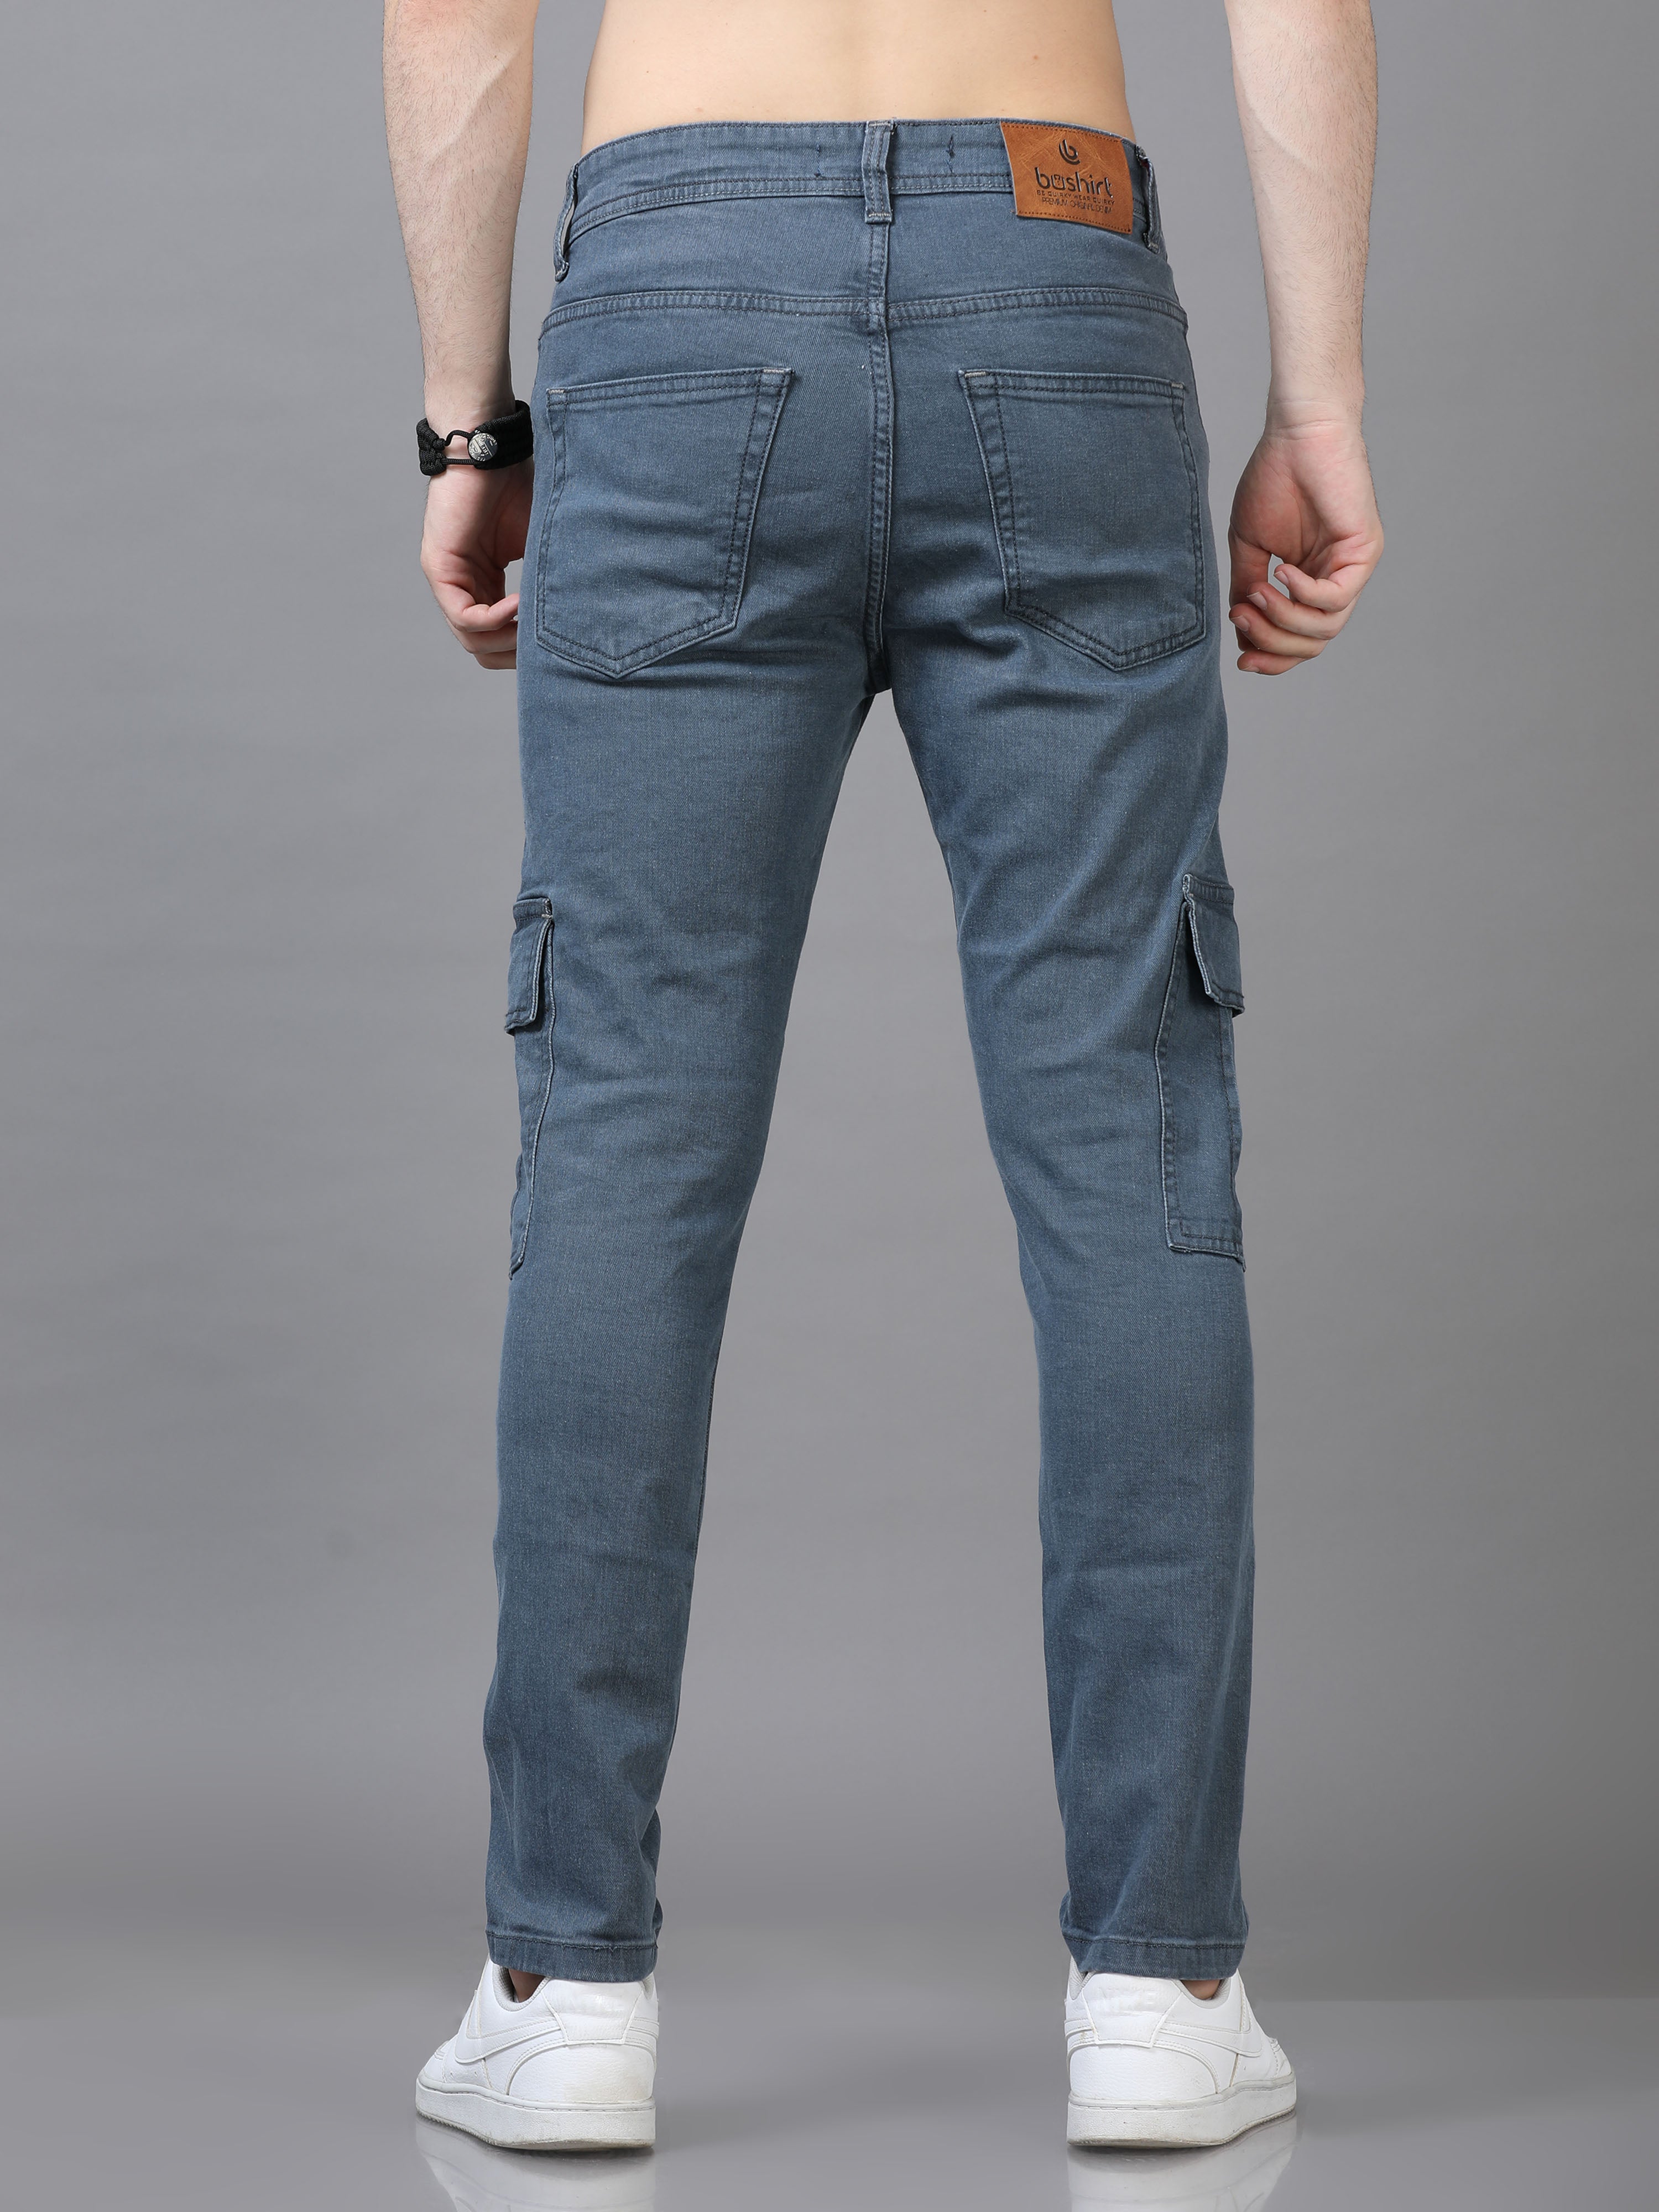 Buy SELECTED Charcoal Grey Slim Cargo Trousers - Trousers for Men 1125225 |  Myntra